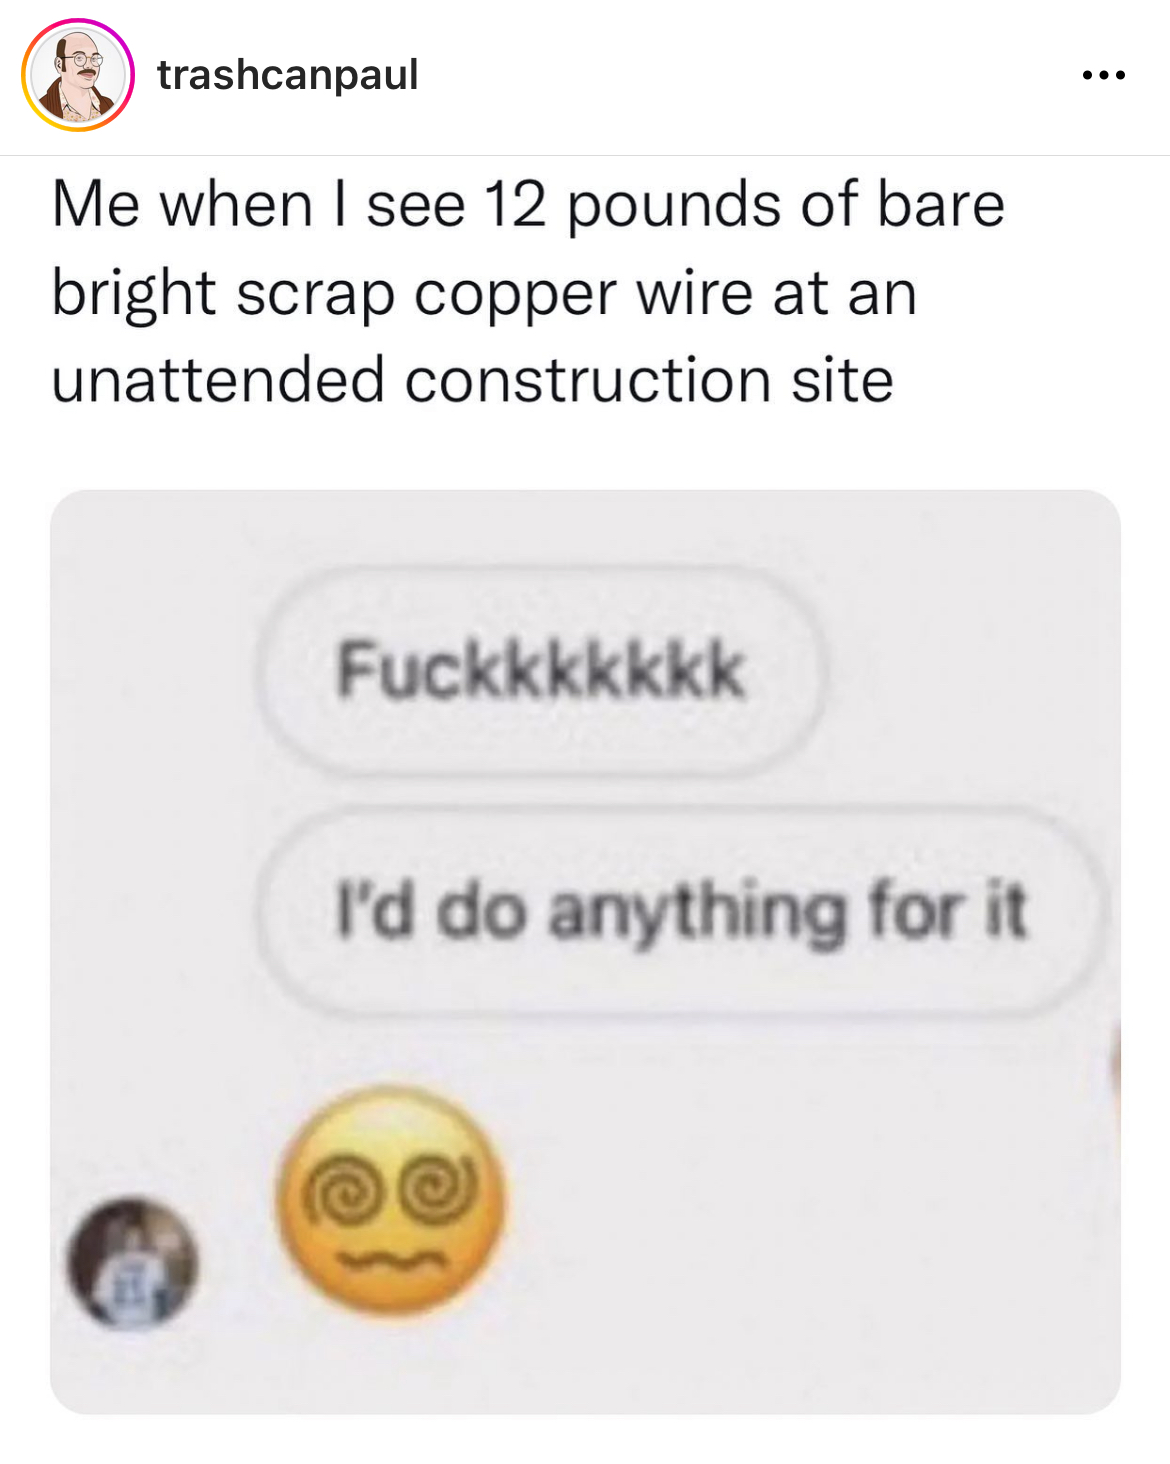 Adam Levine Sexting memes - Celebrity - trashcanpaul Me when I see 12 pounds of bare bright scrap copper wire at an unattended construction site Fuckkkkkkk I'd do anything for it ...